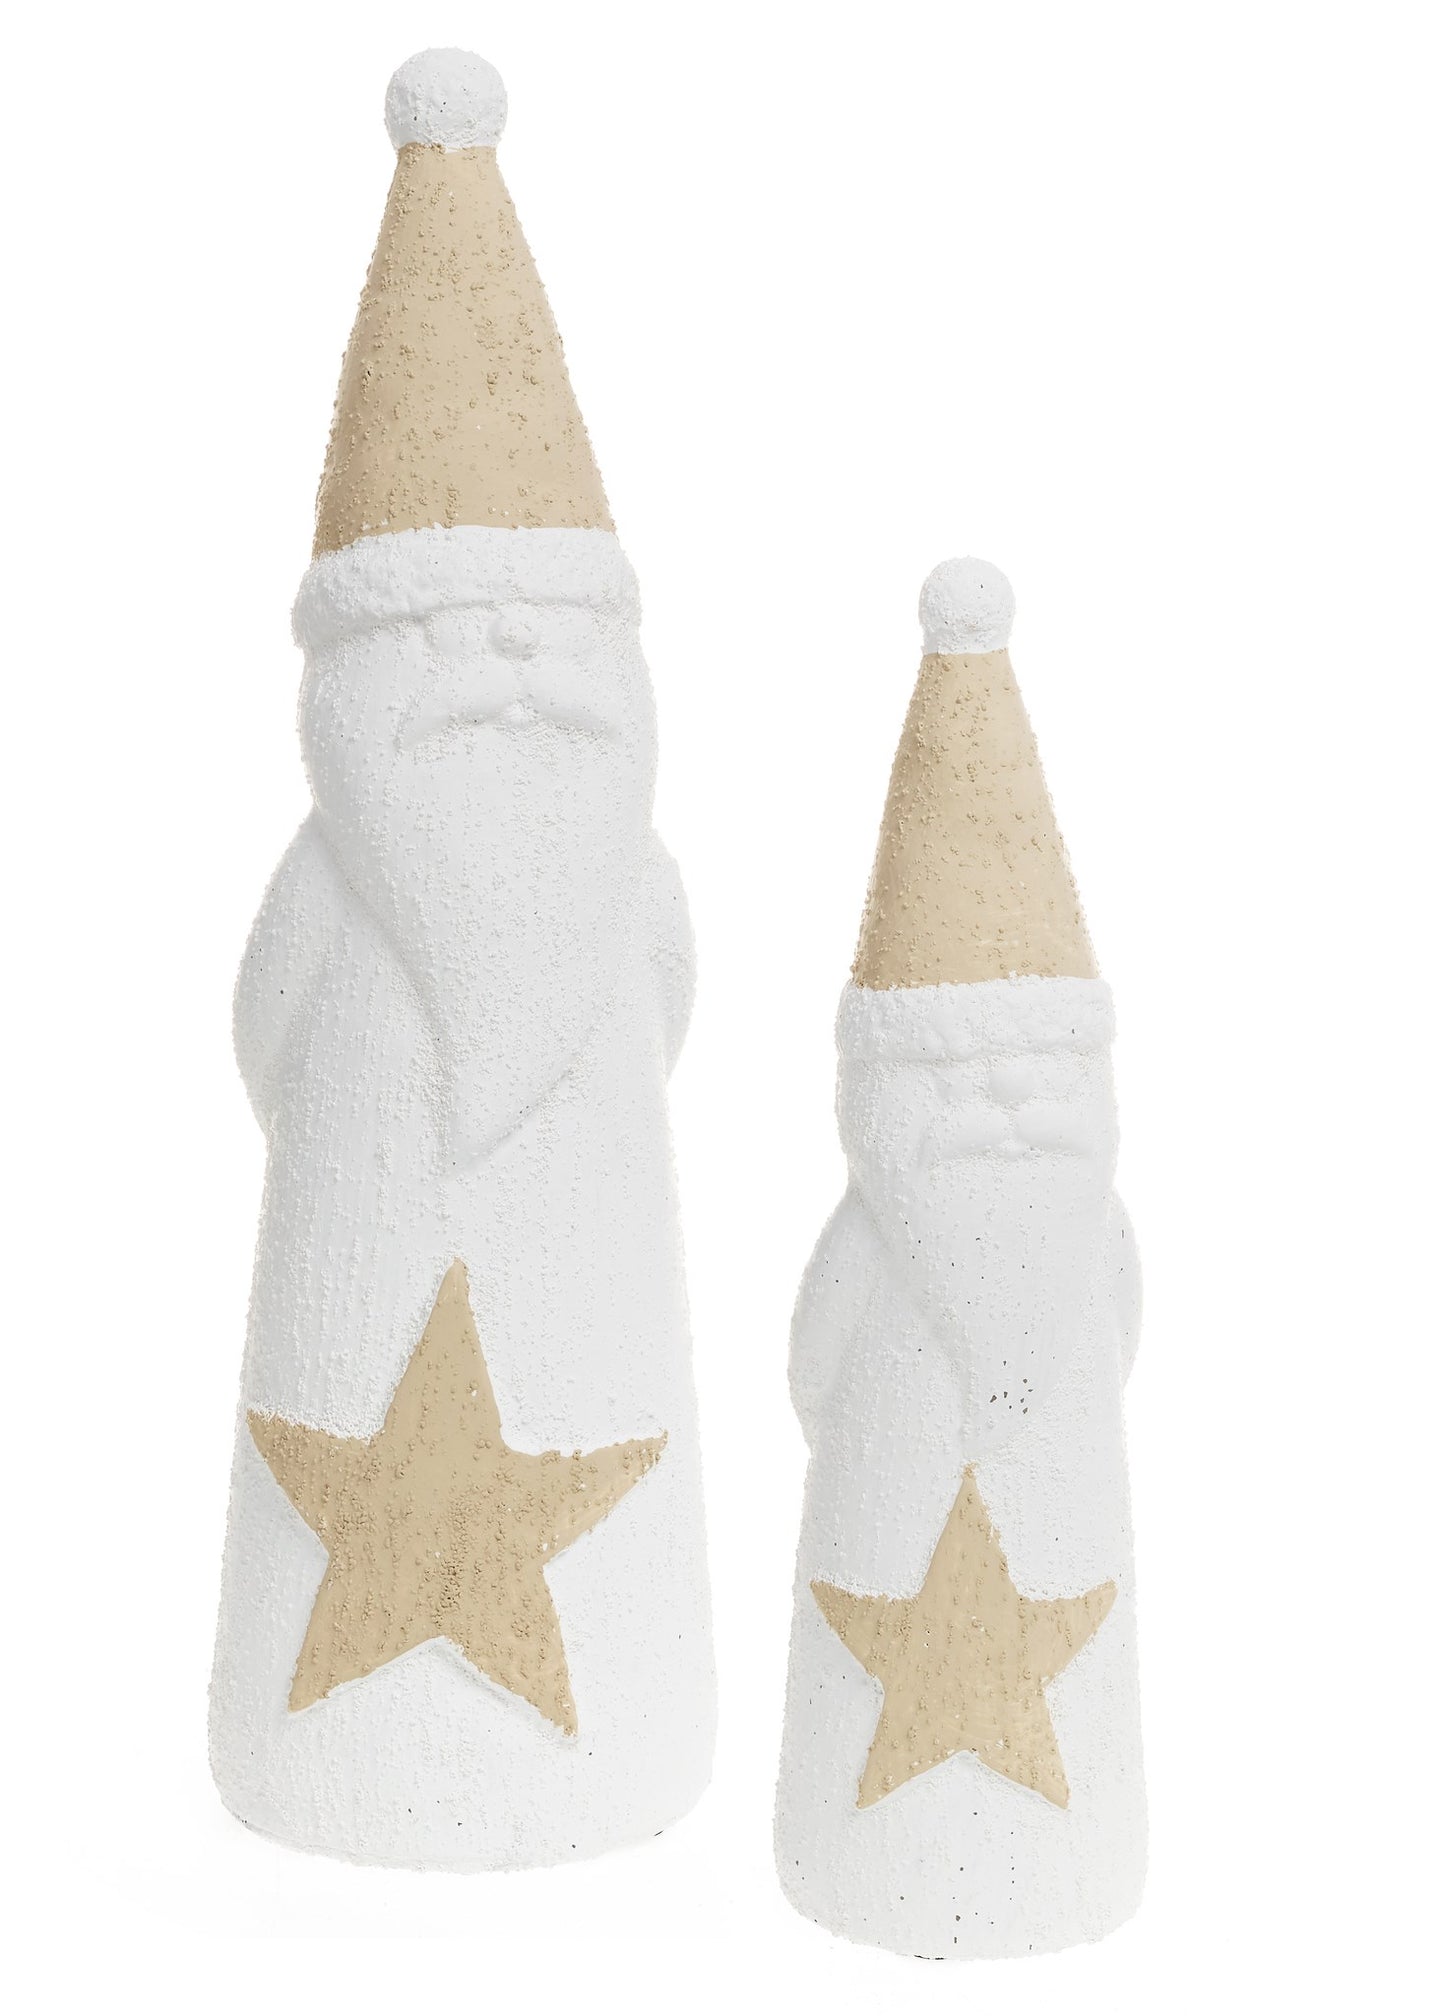 Cement Santa with gold star